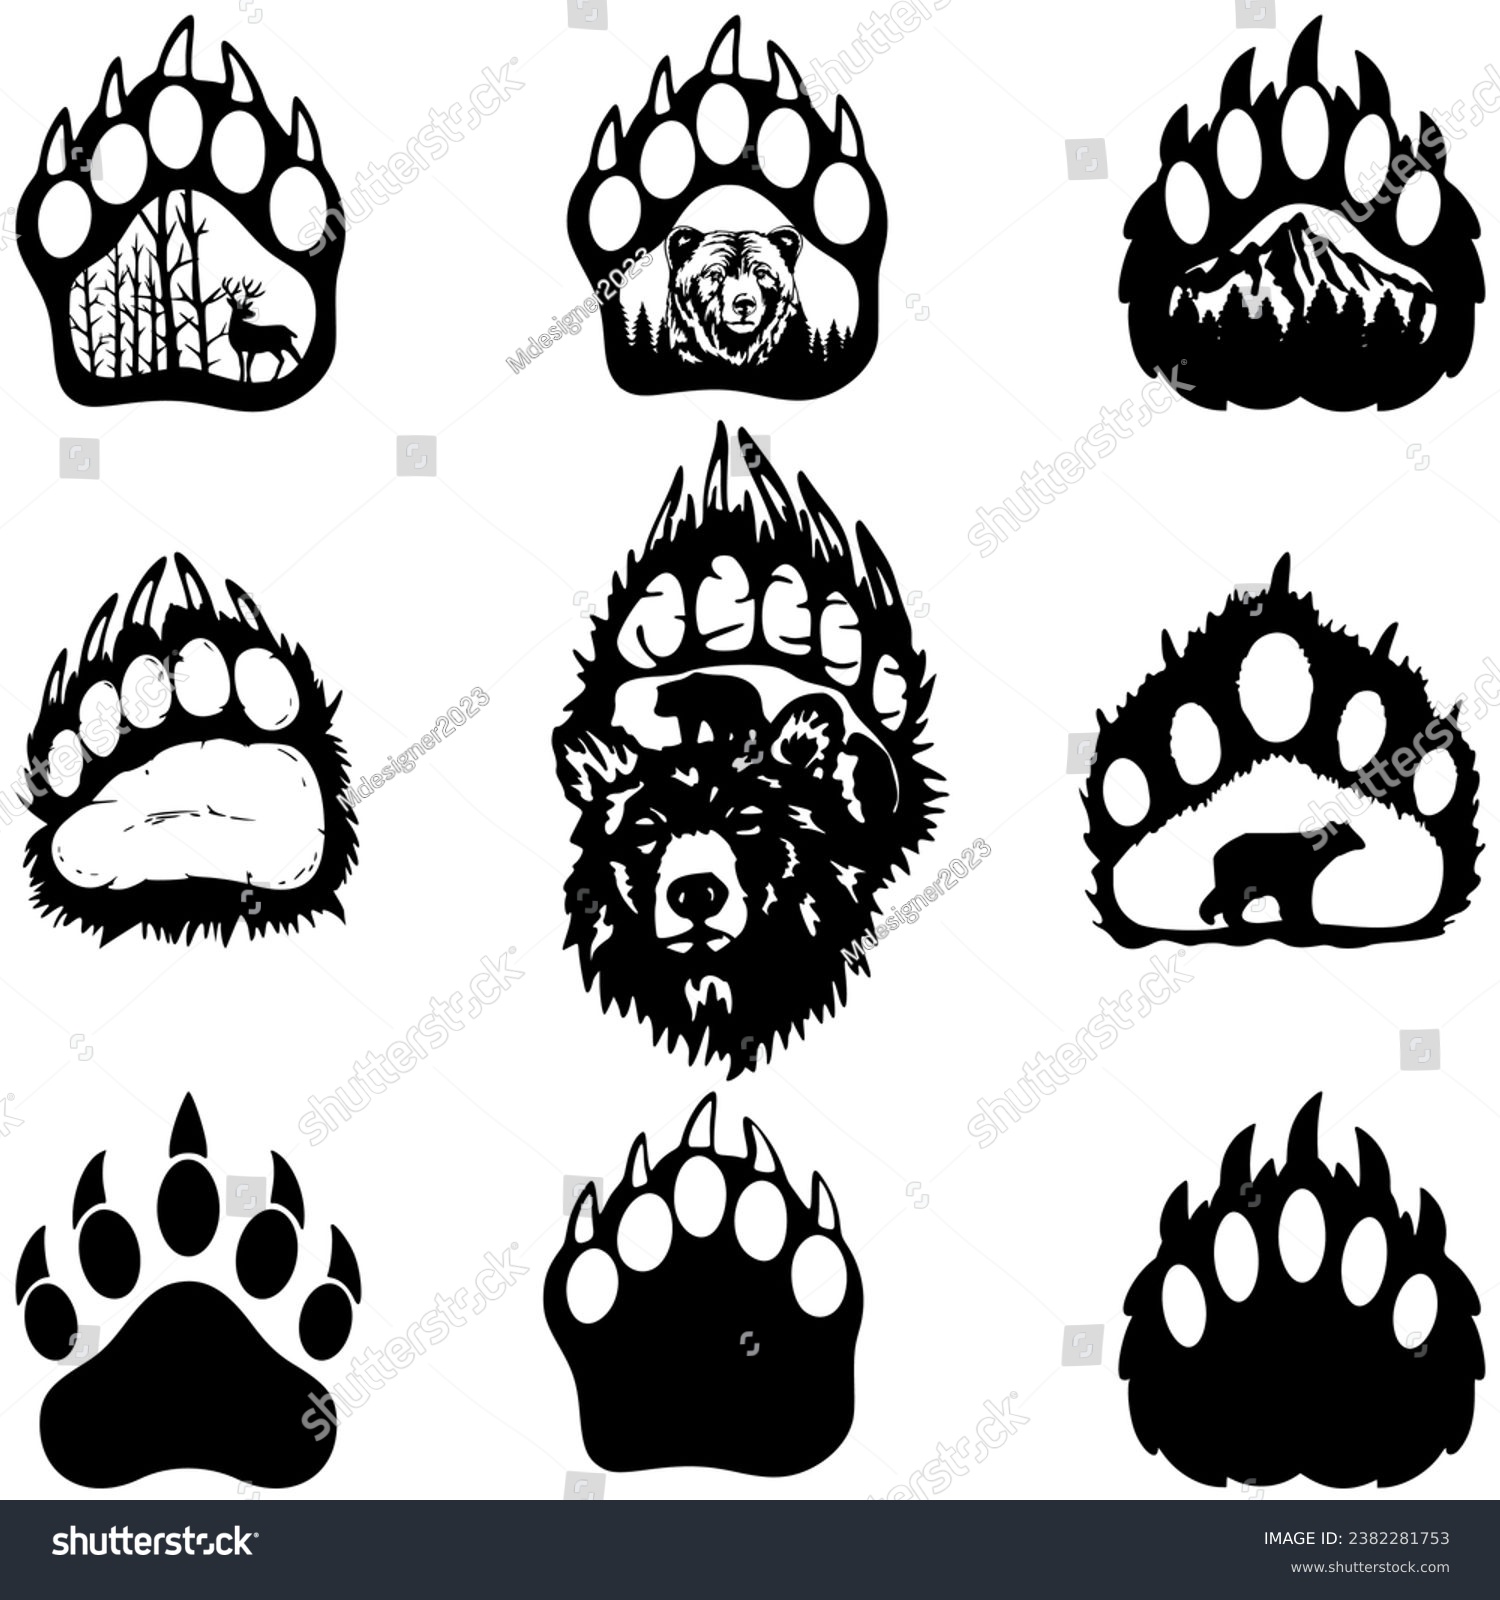 SVG of Bear Paw Silhouettes Set,Bear Claw Vector Image, Bear Claw Silhouettes Set svg